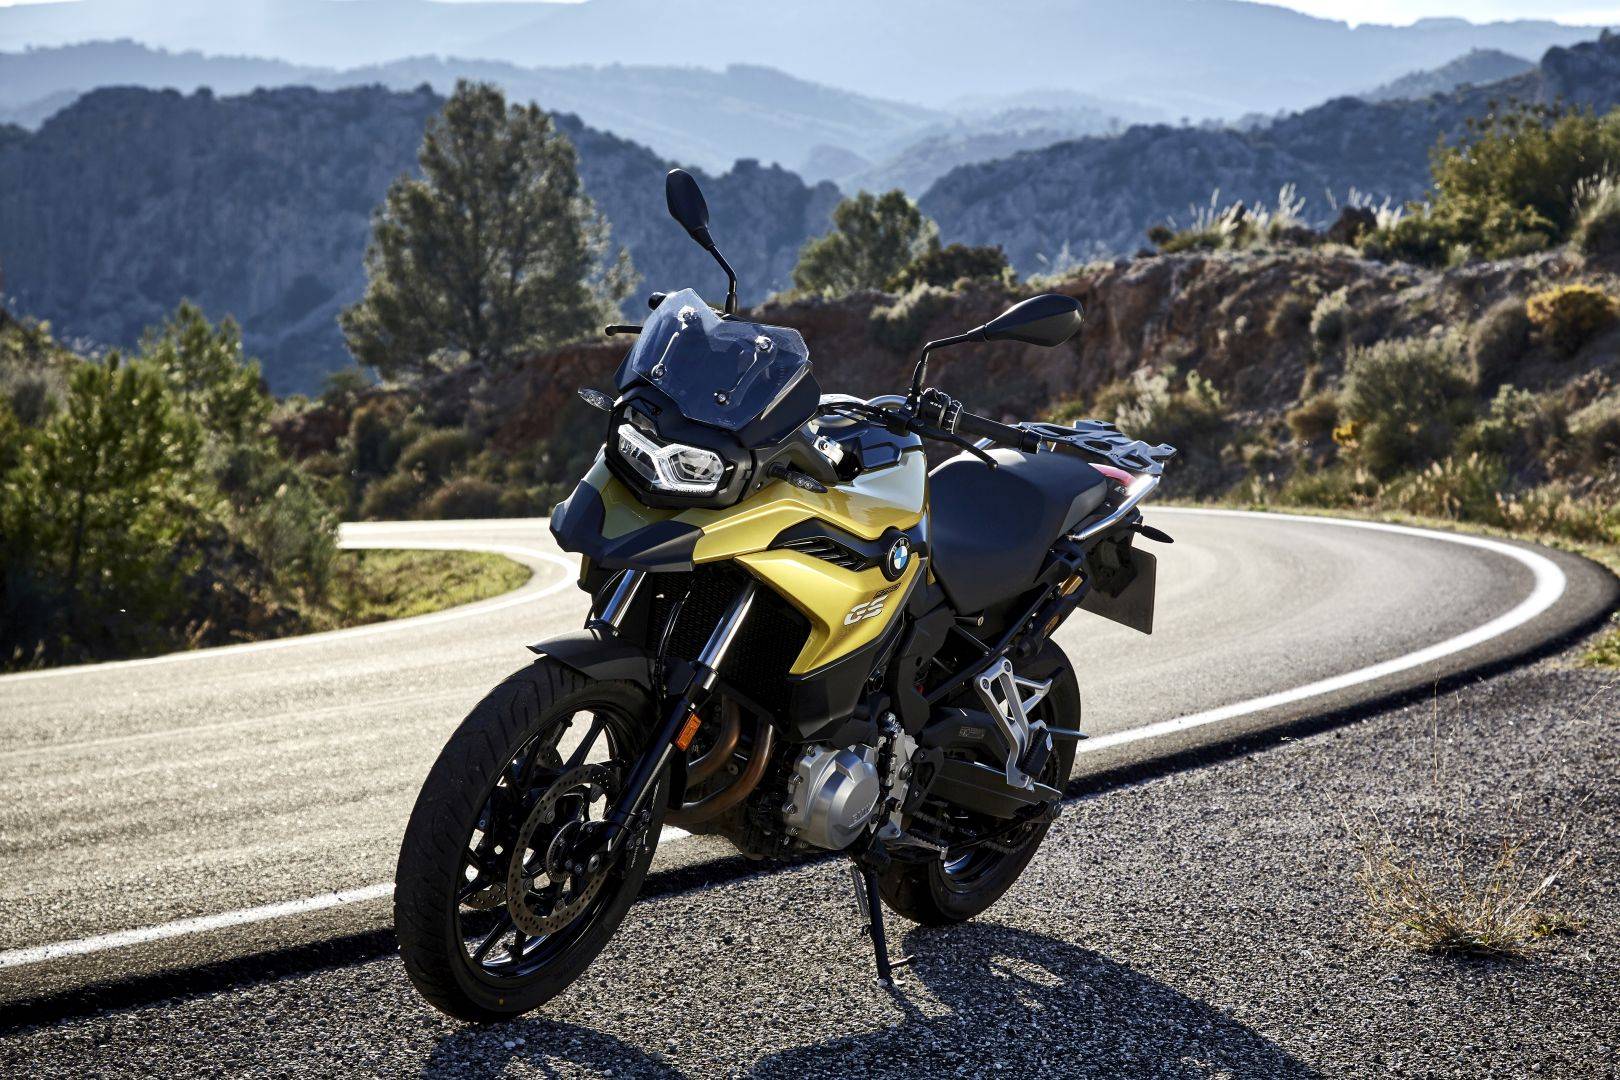 Bmw f 850 gs vs f 800 gs: what’s changed for the better?
– lone rider